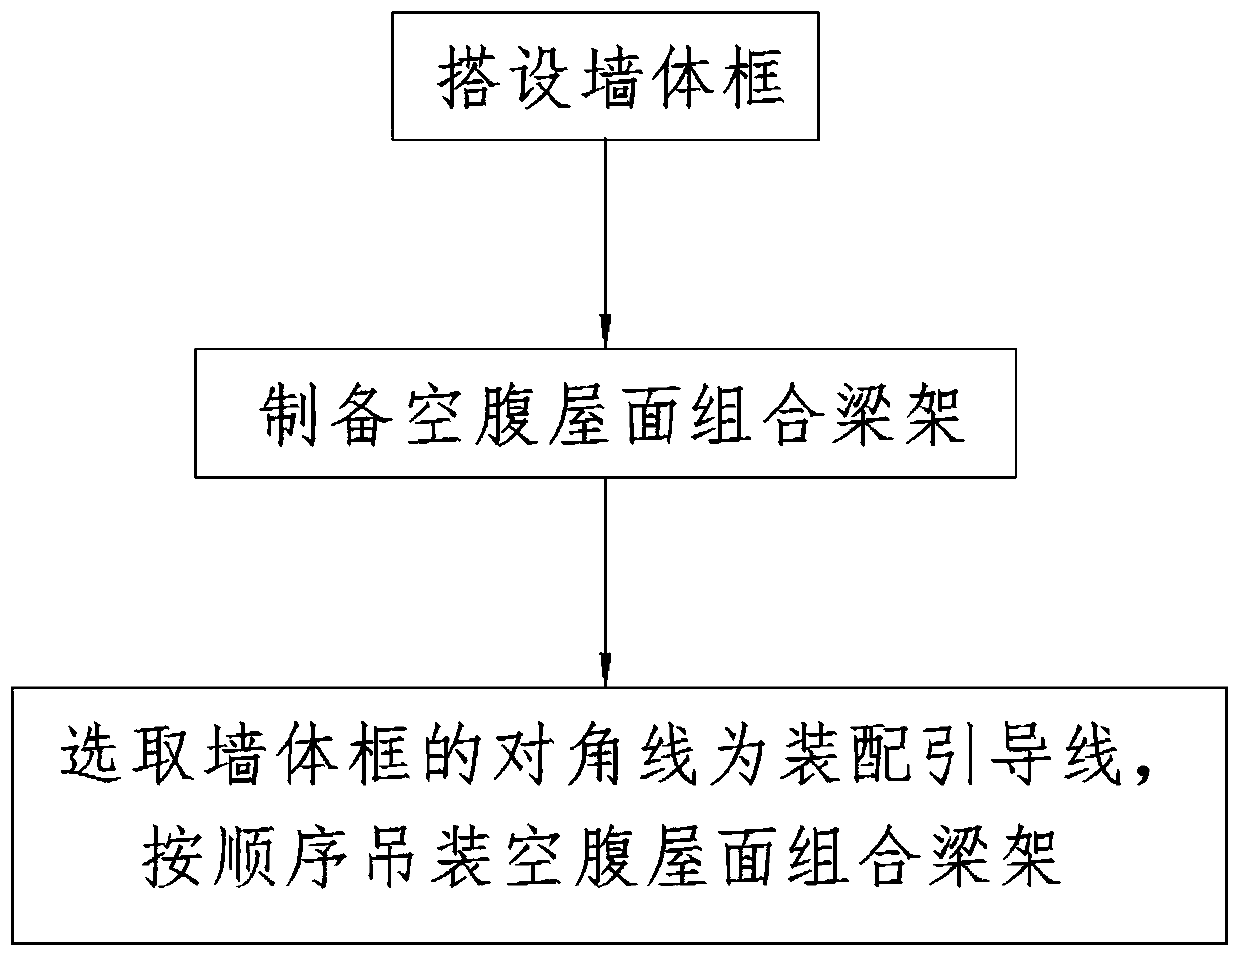 Construction method of assembling-type load-bearing steel structure factory building framework